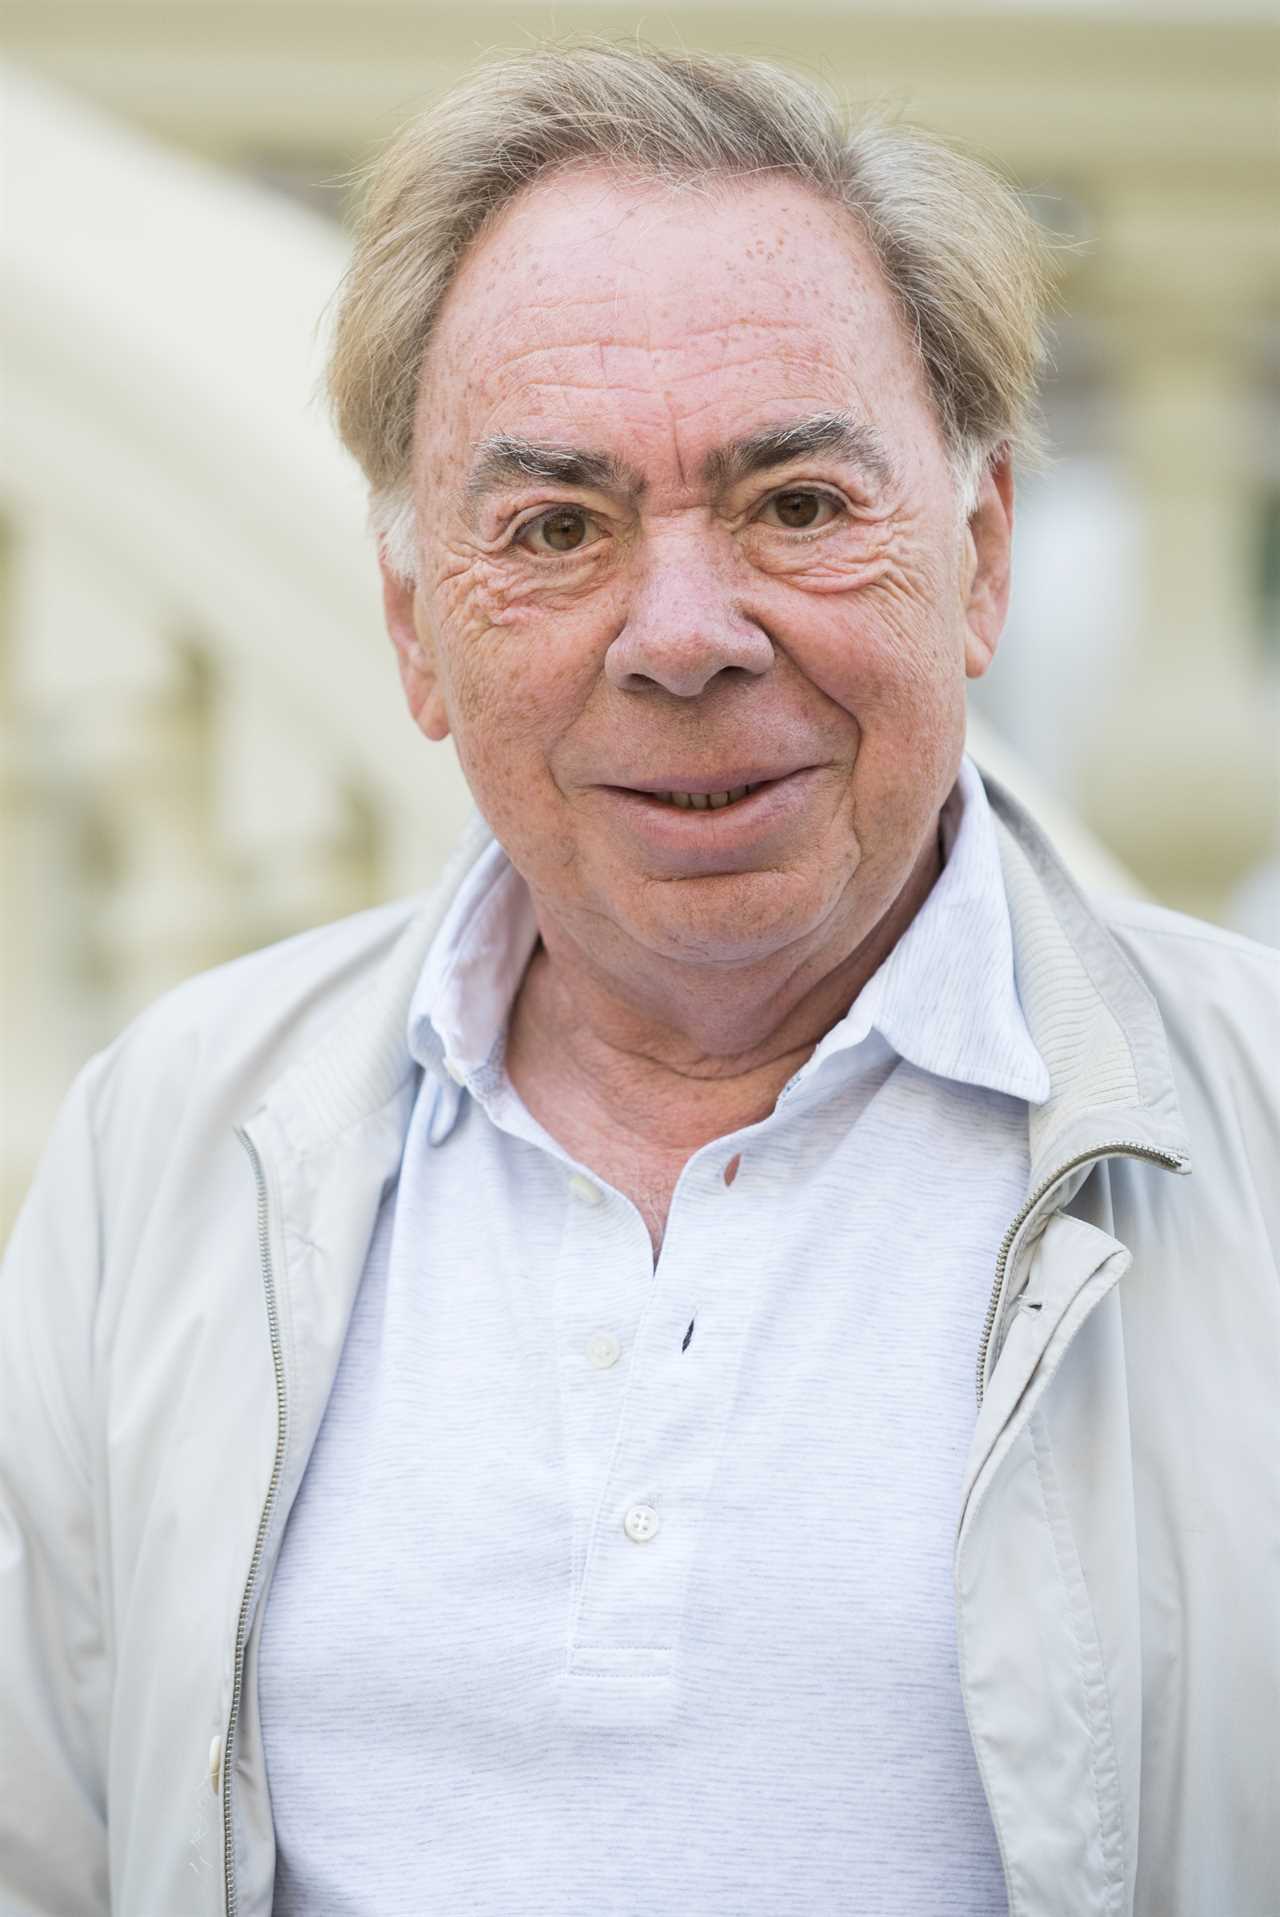 Andrew Lloyd Webber reveals his son is ‘critically ill’ with cancer saying ‘I am absolutely devastated’